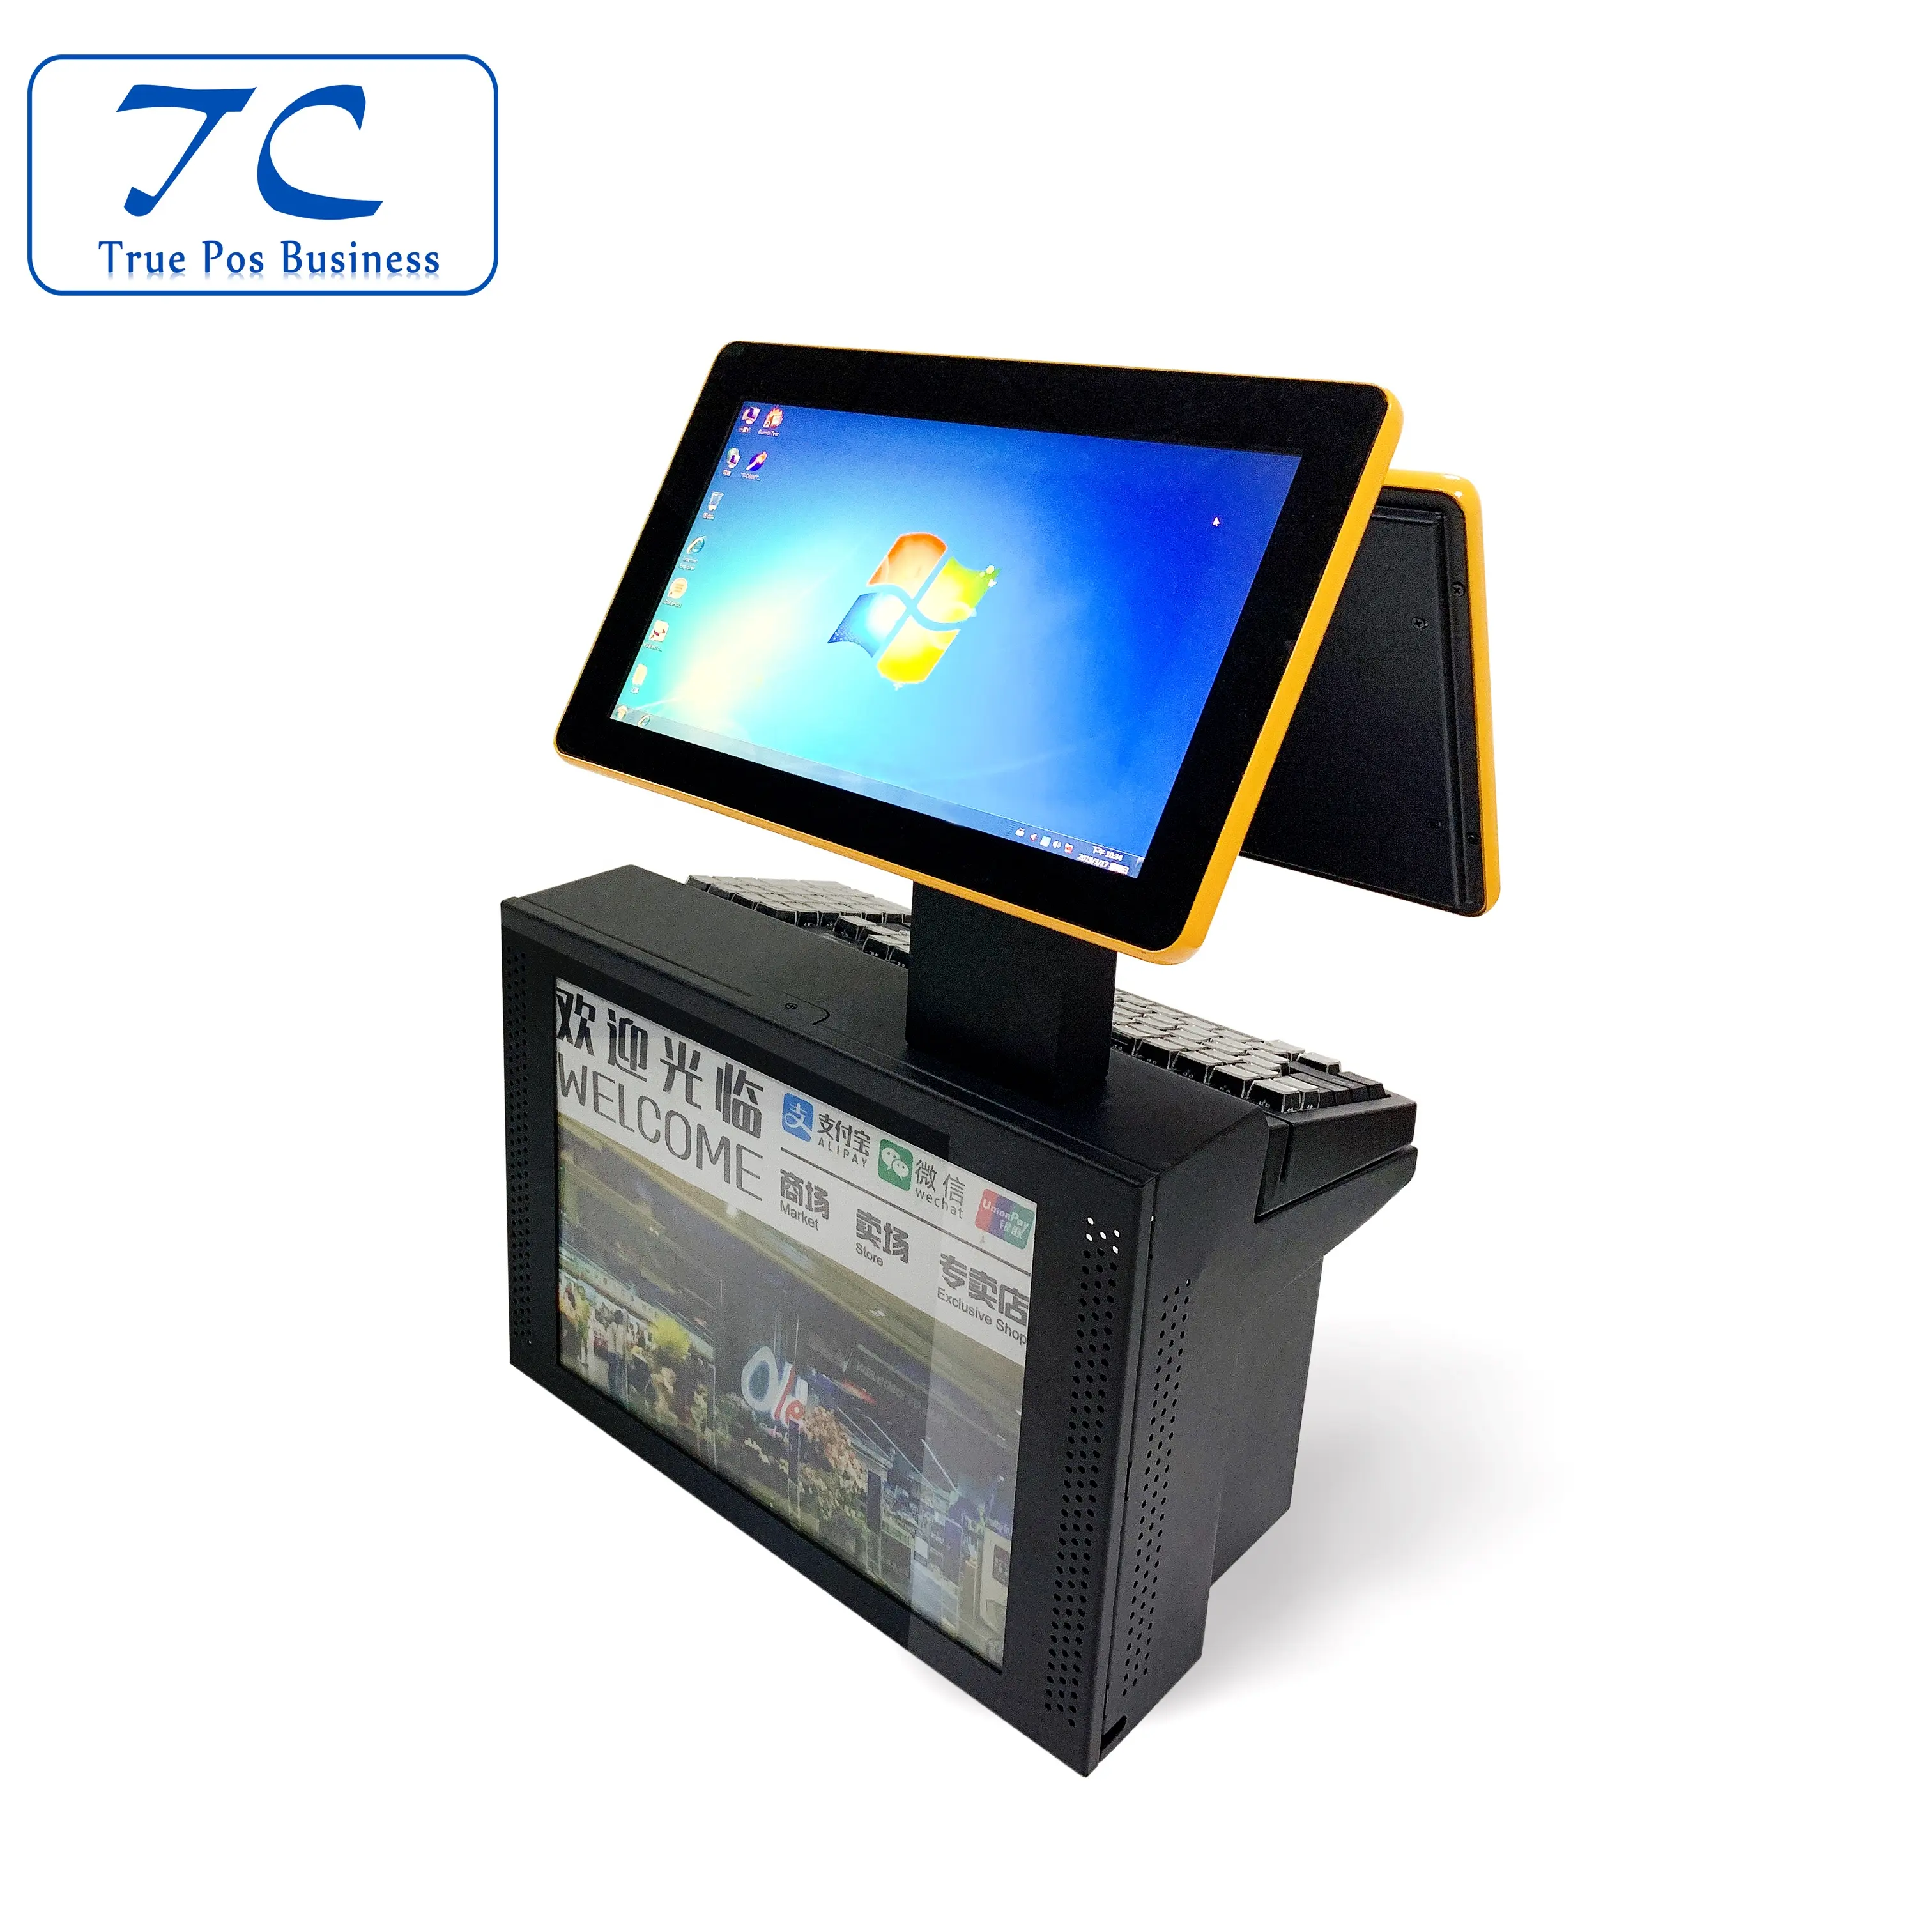 China factory all in one pos machine for retail